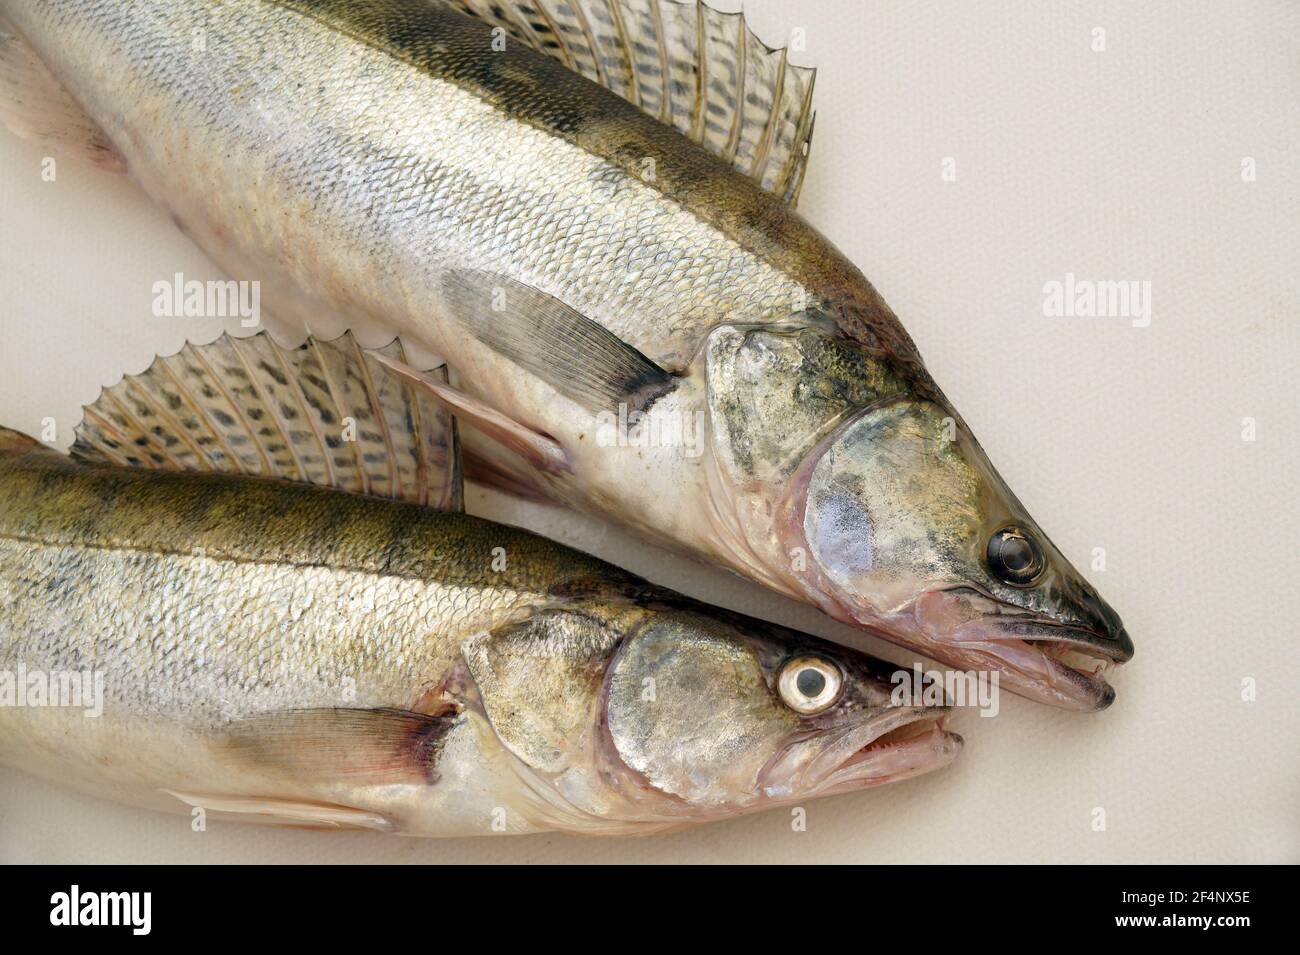 The effect of a fishing trip. Zander or pike perch (Lucioperca lucioperca) is the greater cousin of the American walleye. Stock Photo